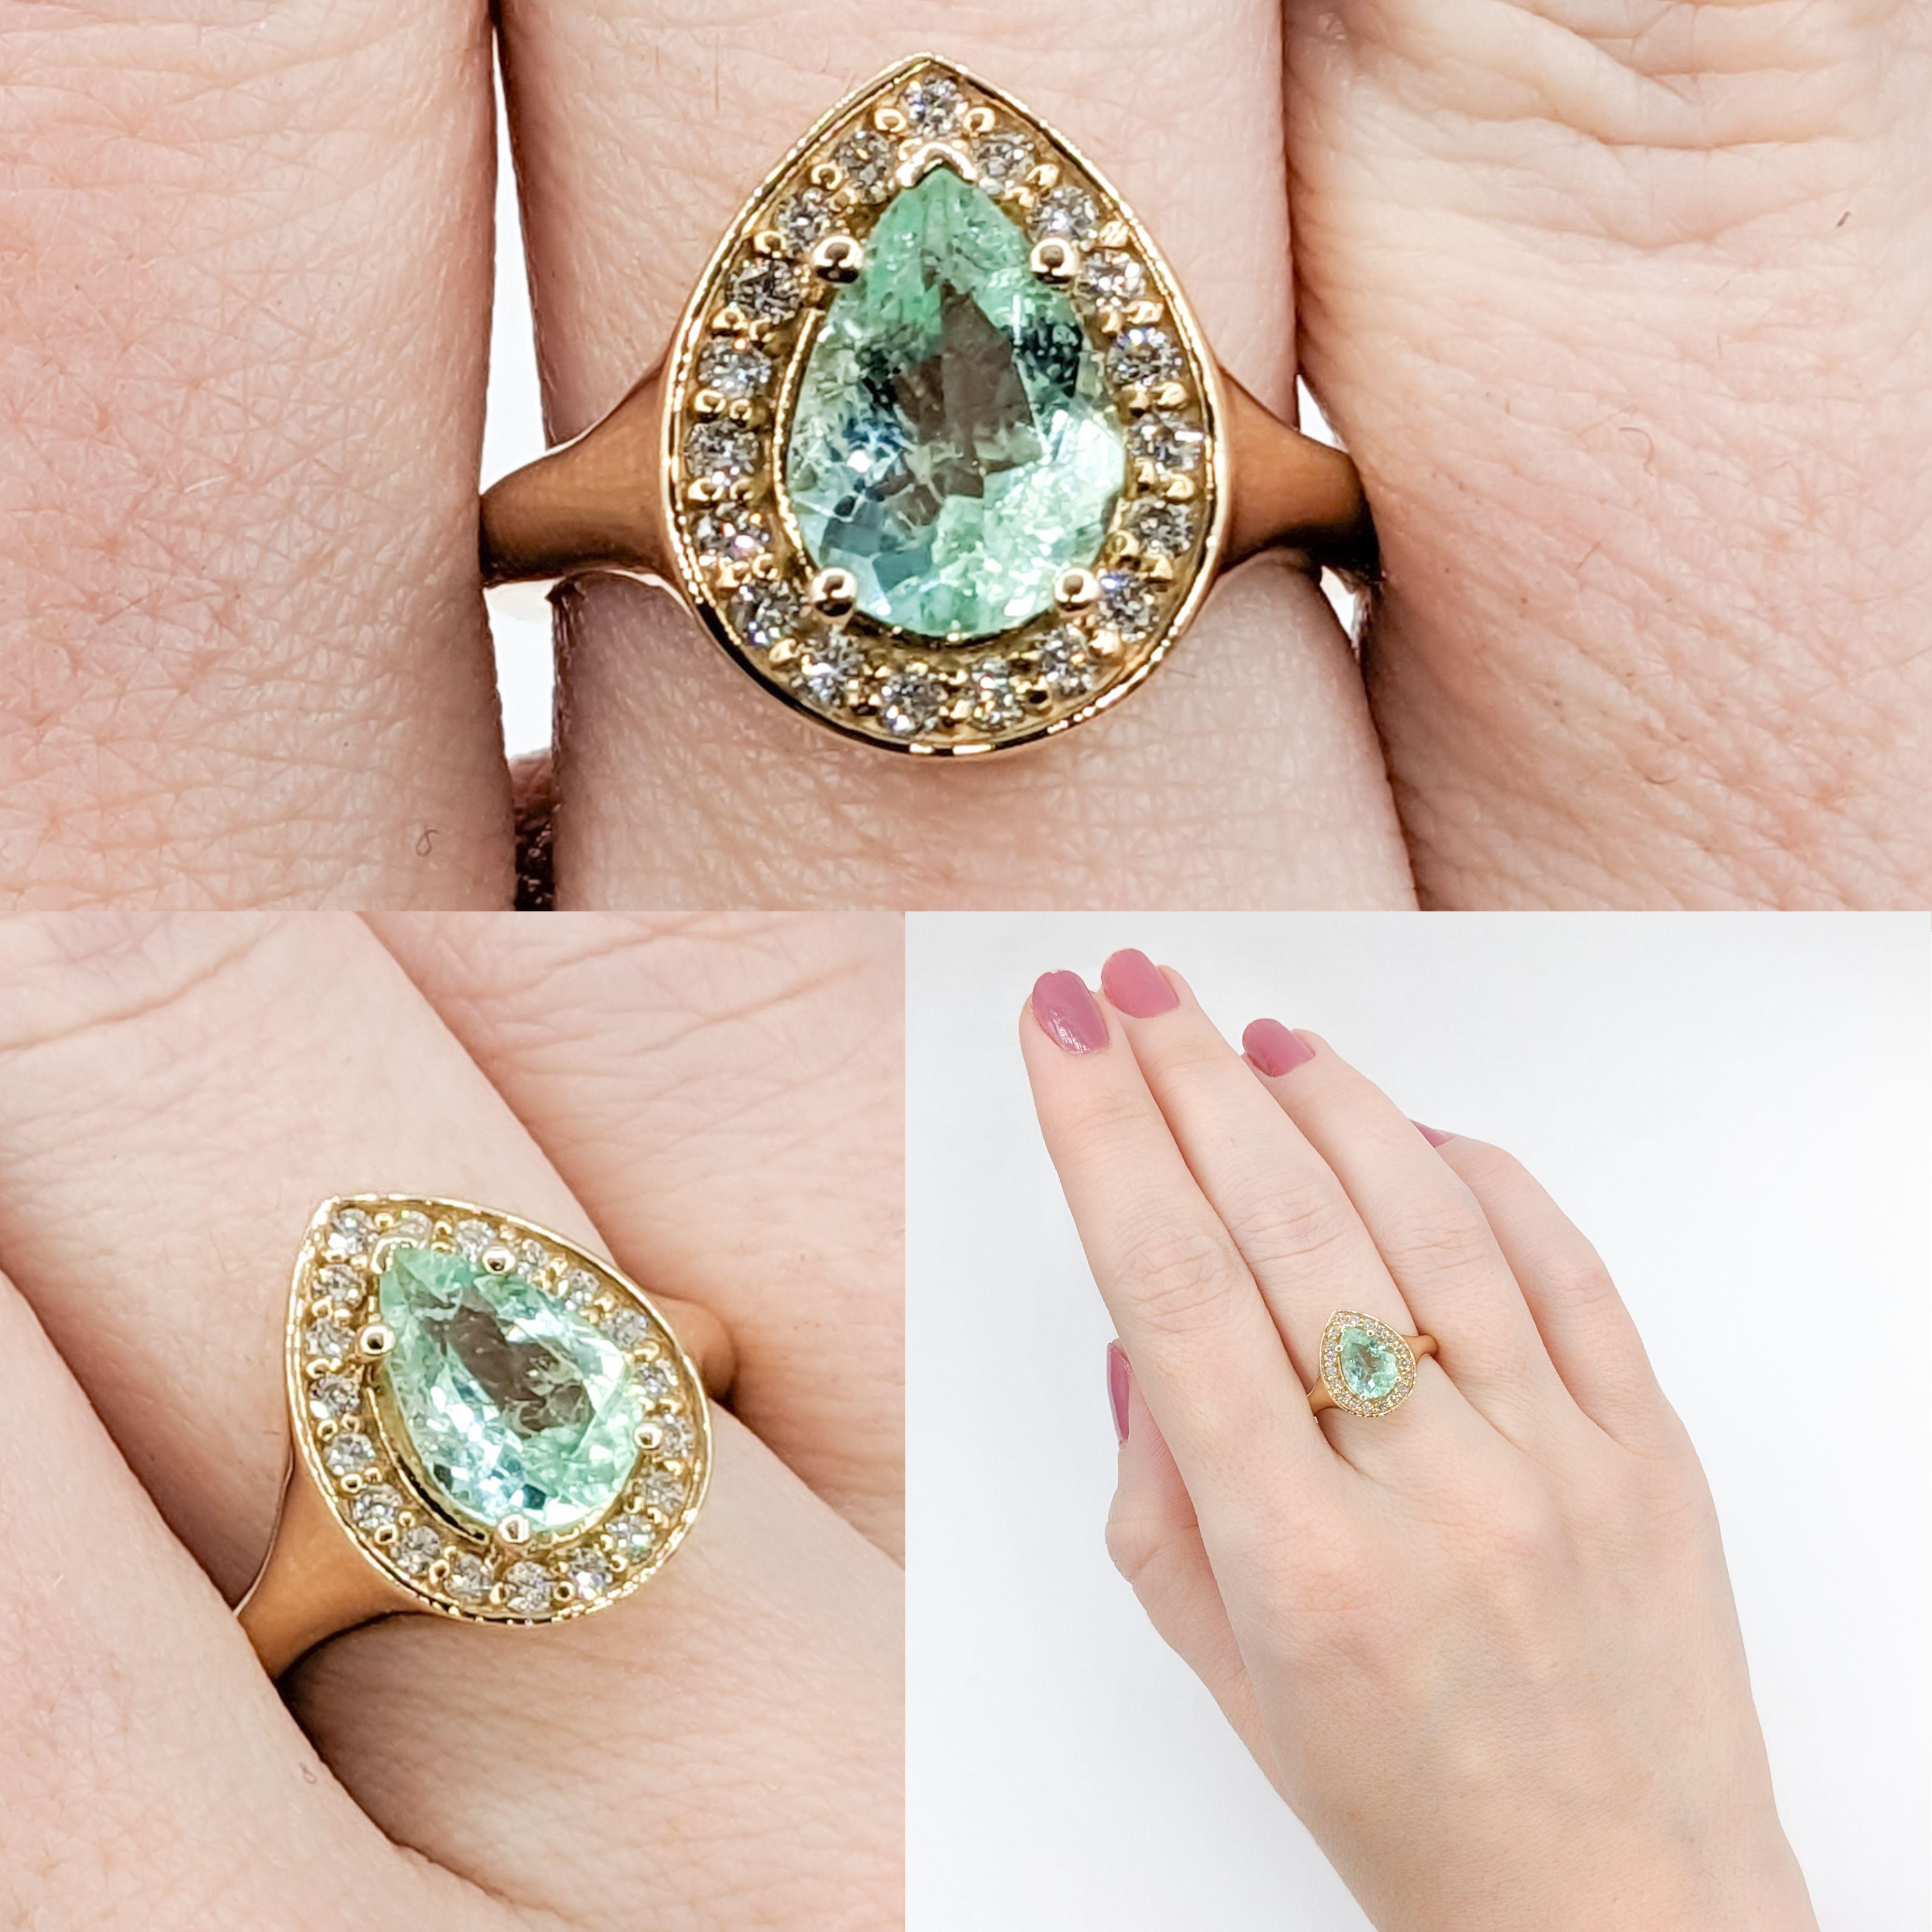 Custom 1.45ct Colombian Emerald Diamond Halo Ring

This beautiful pear shaped ring, nestled in high-quality 14k yellow gold, showcases a stunning centerpiece: a 1.45ct Colombian Emerald that dazzles with a pastel green hue. Further enhancing the